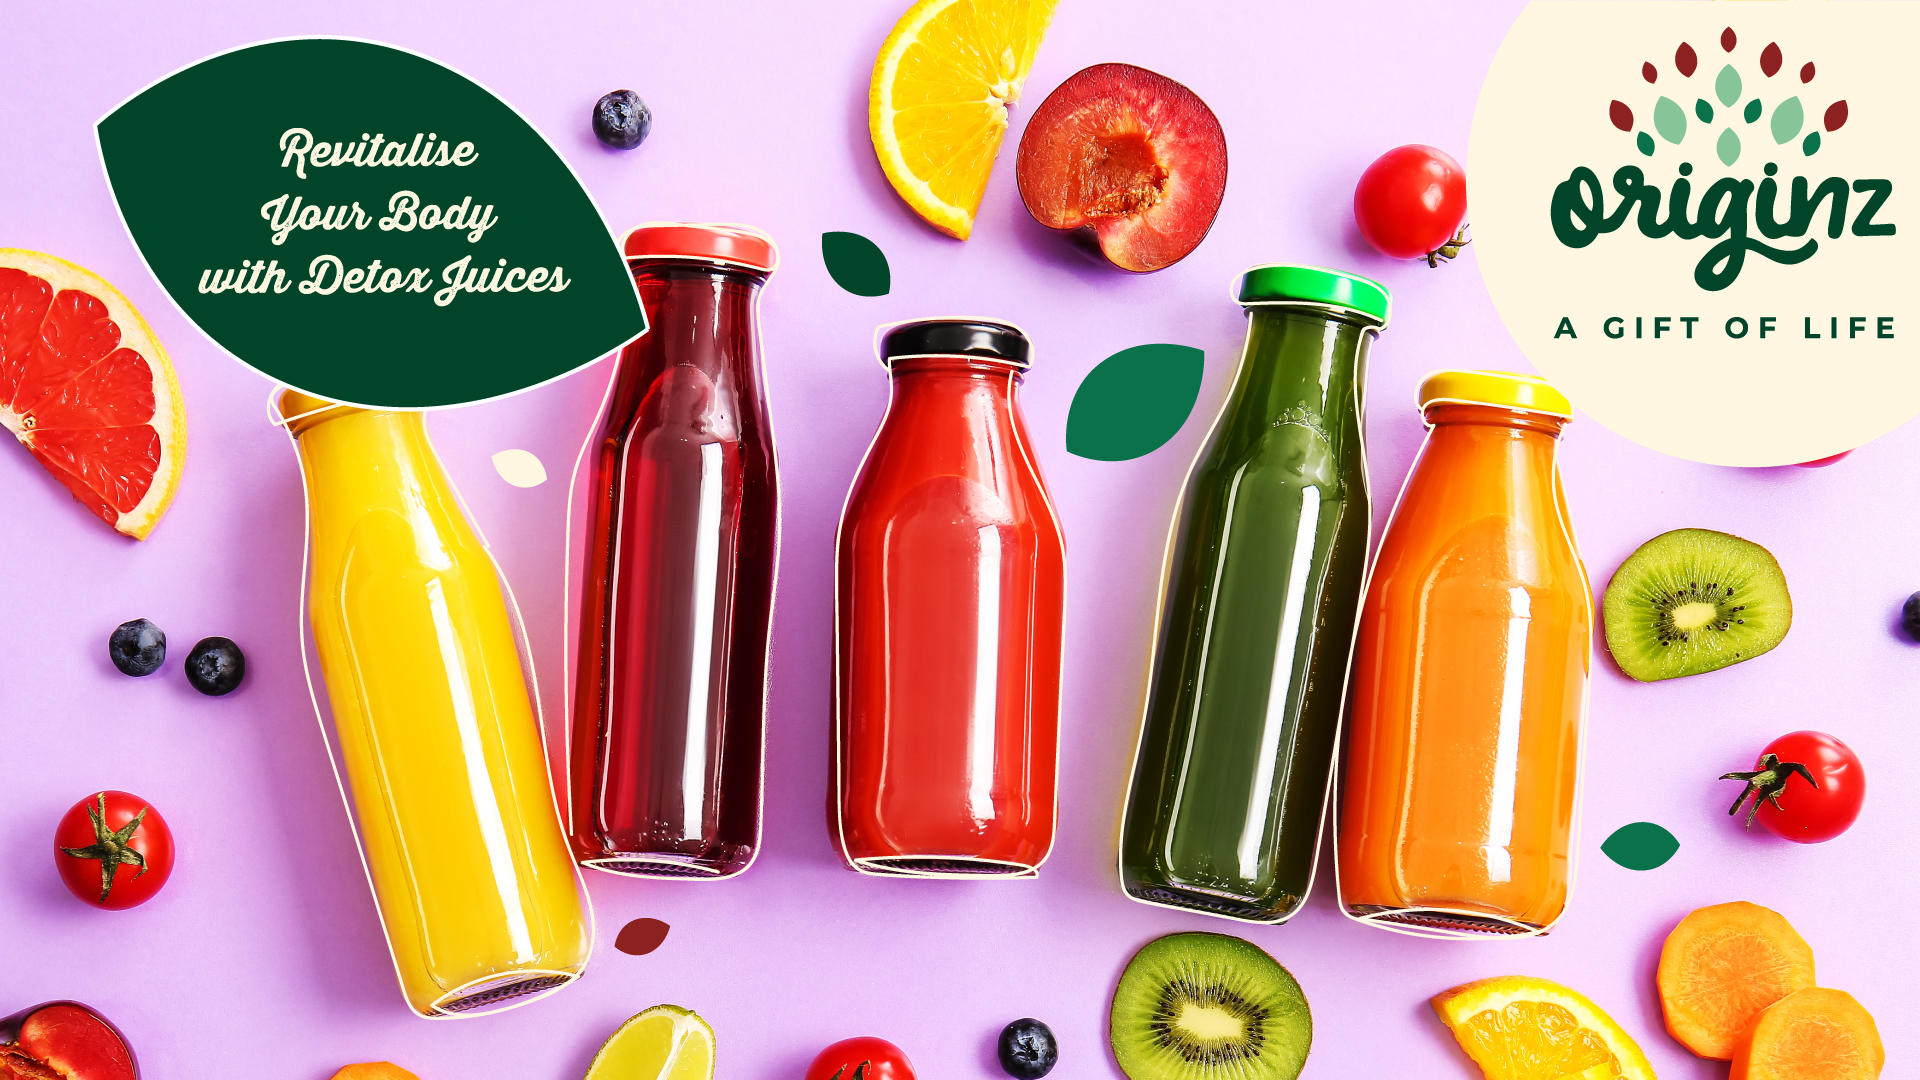 Revitalise Your Body with Detox Juices